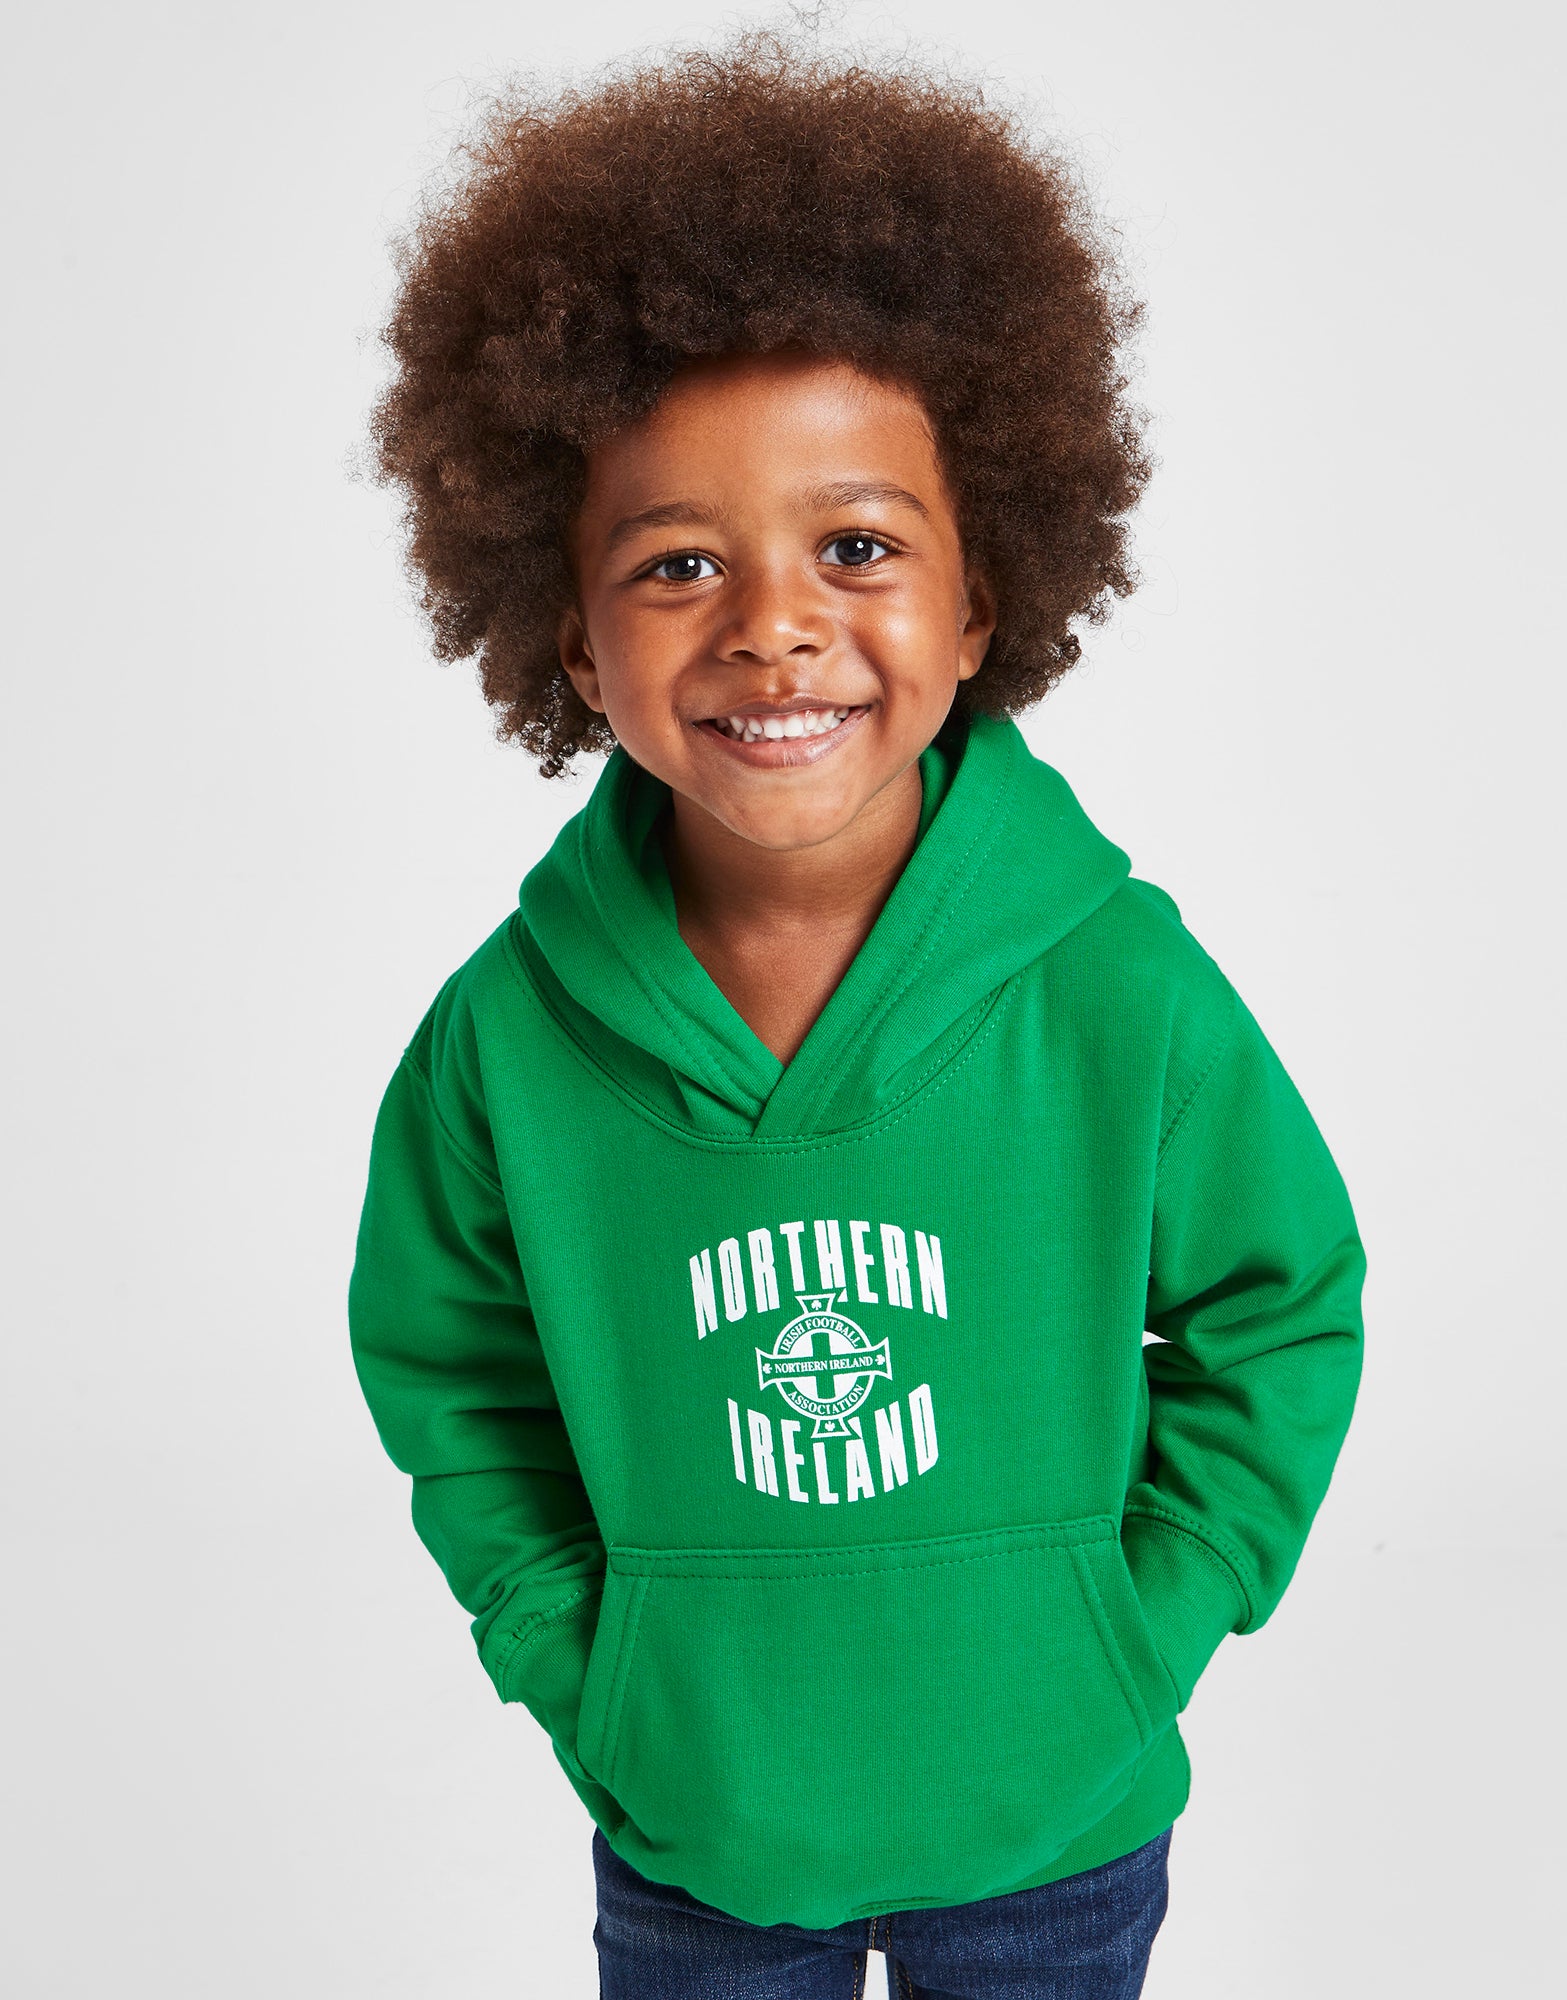 Official Northern Ireland Crest Hoodie Kids - Green - The World Football Store